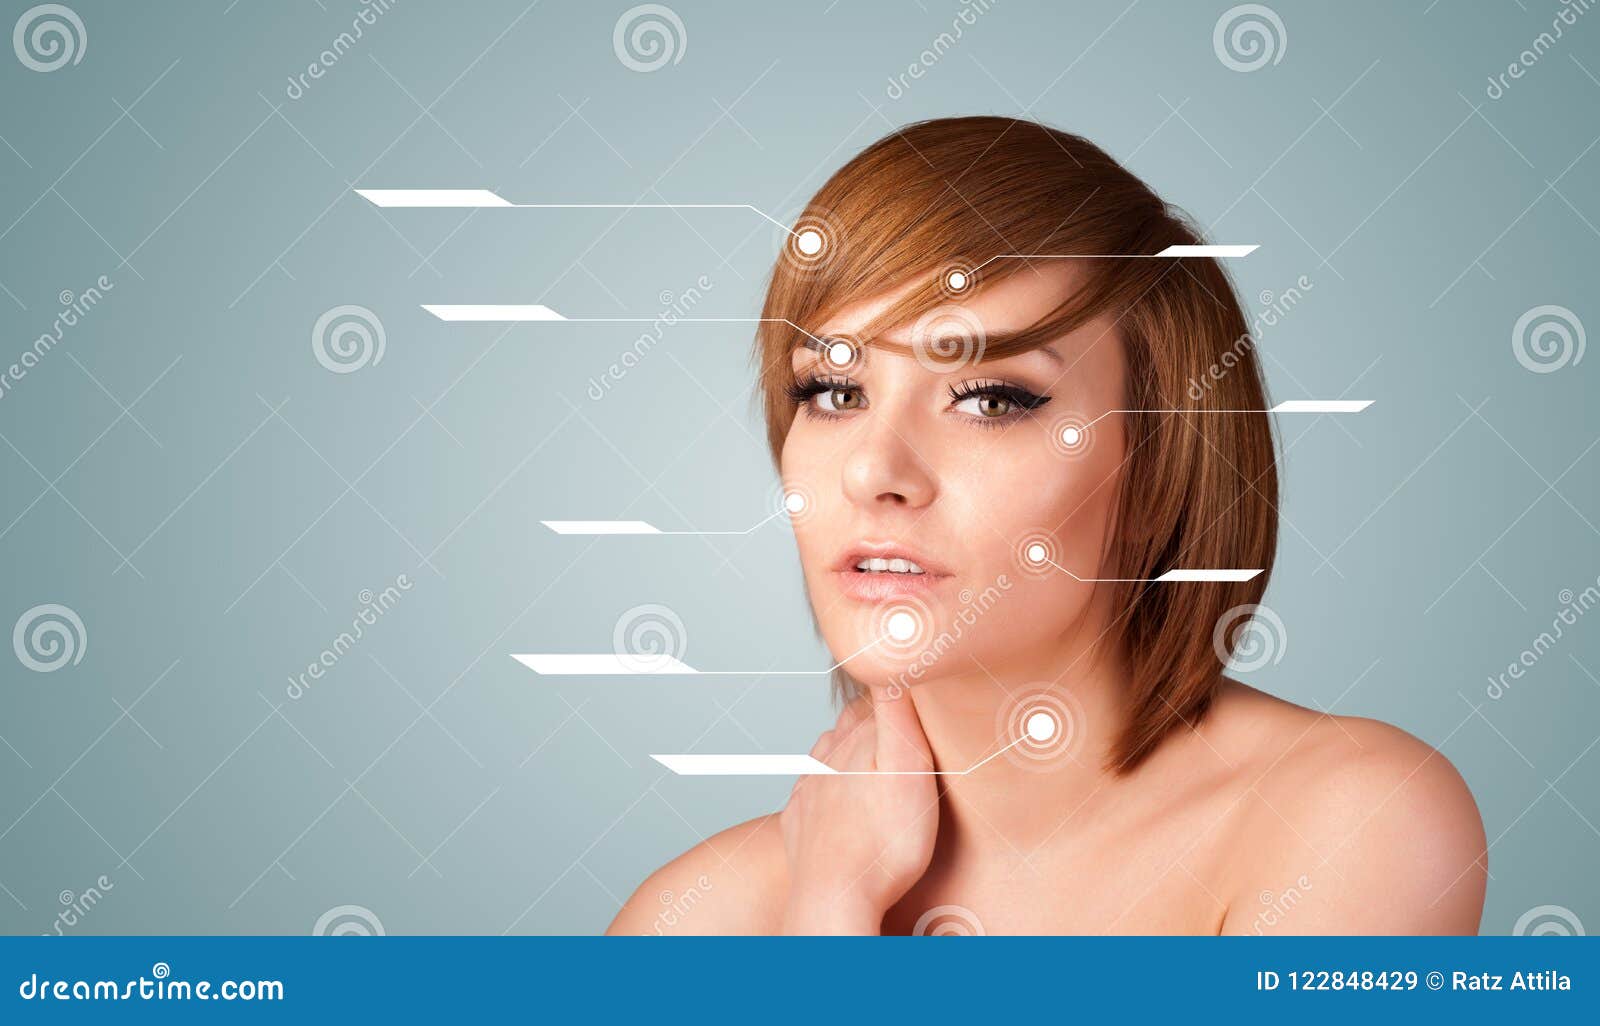 Young Girl With Facial Treatment Modern Arrows Stock Image Image Of